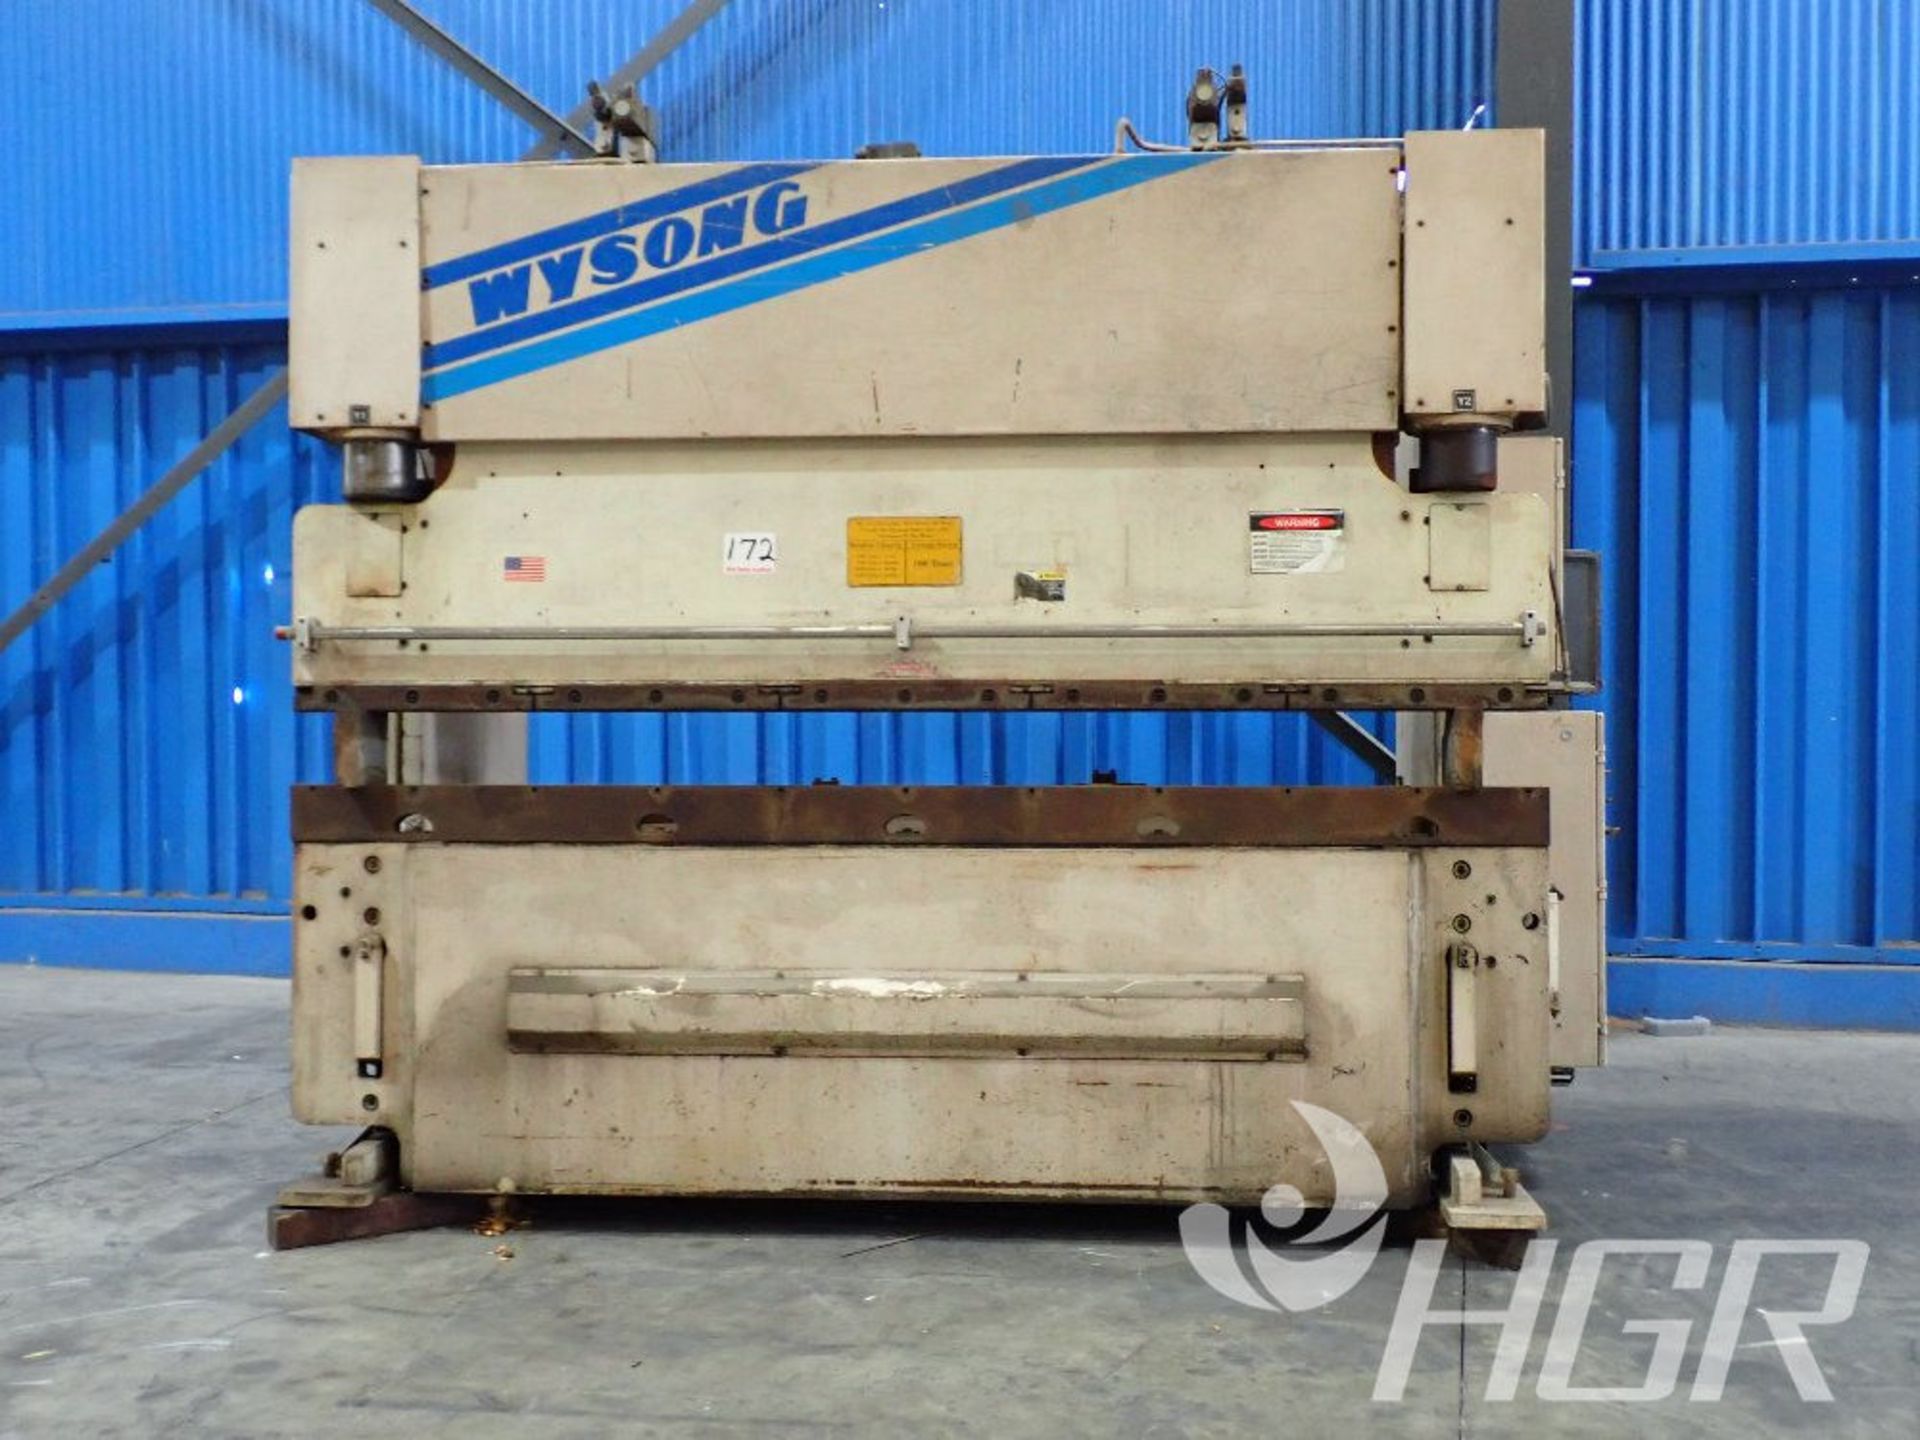 WYSONG CNC PRESS BRAKE, Model PHP100-120, Date: n/a; s/n HPB46-127-X, Approx. Capacity: 100 TON 10', - Image 2 of 25